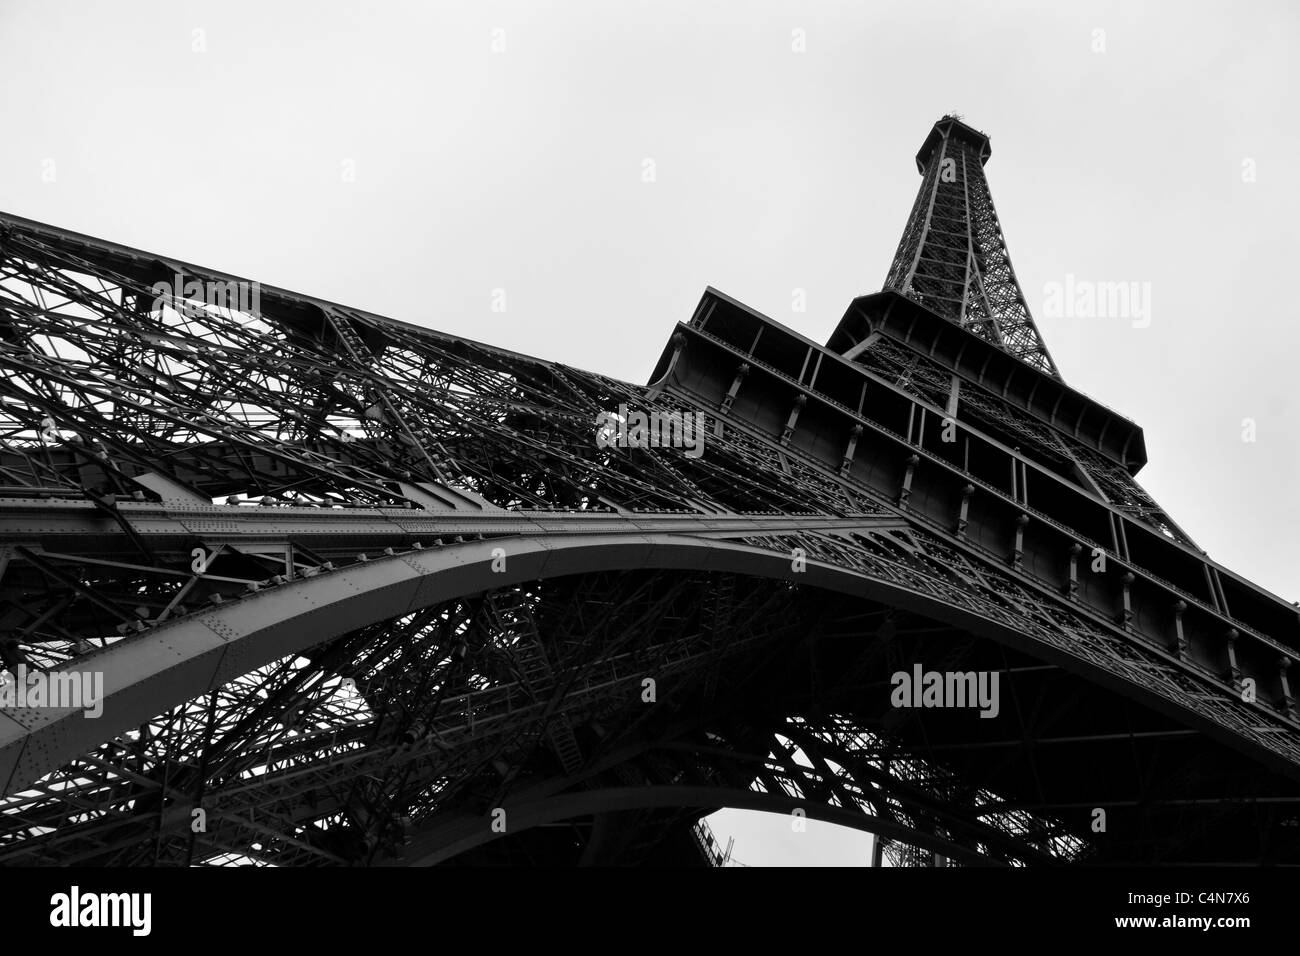 Looking up at the iconic and unmistakable Eiffel Tower, the world famous landmark in Paris, France Stock Photo